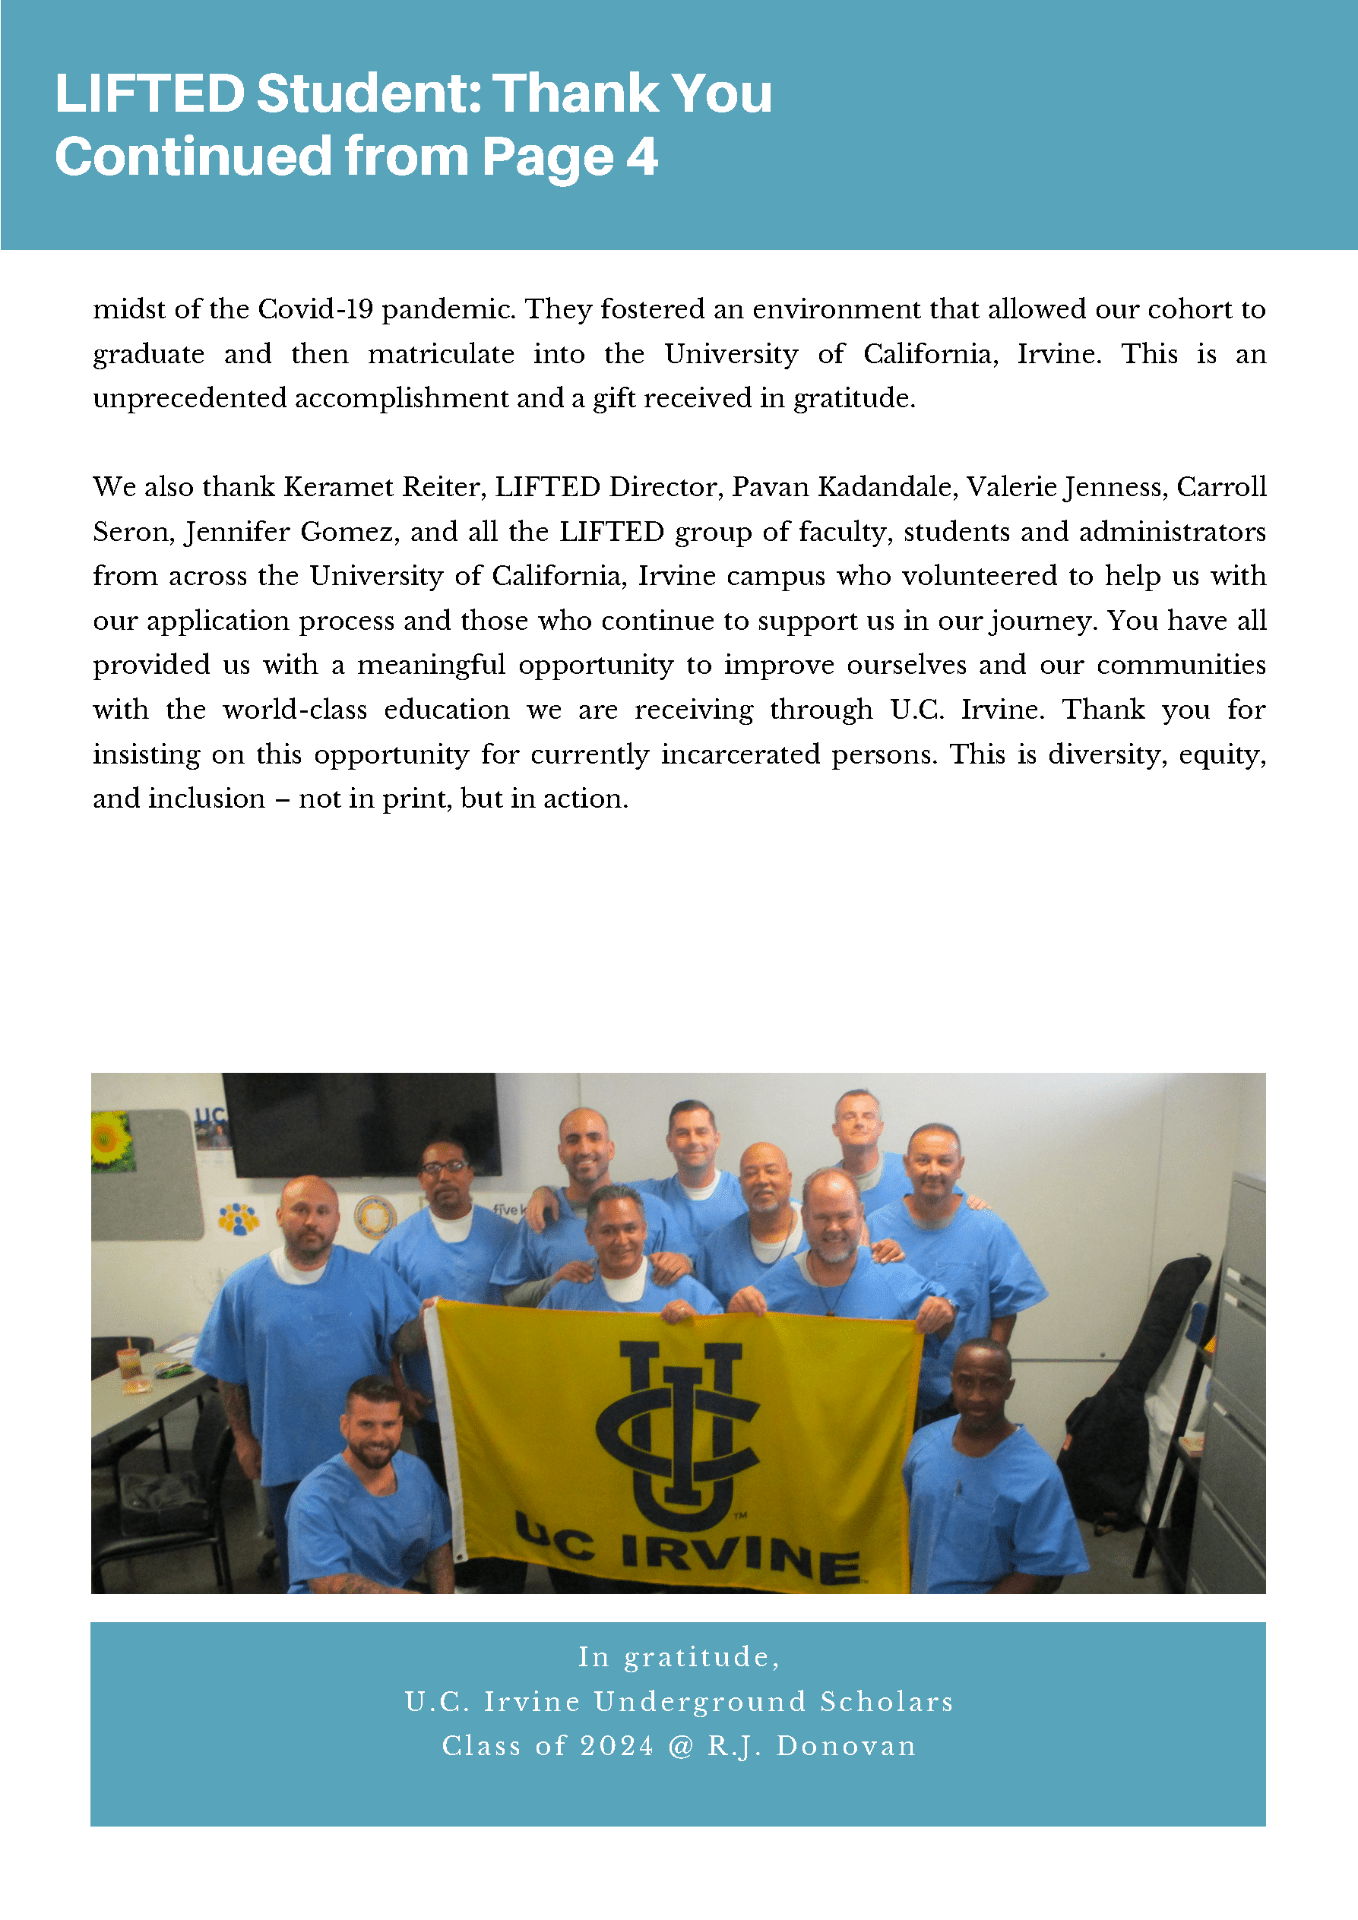 UCI LIFTED Newsletter with photo of first group of LIFTED students holding yellow UCI banner.